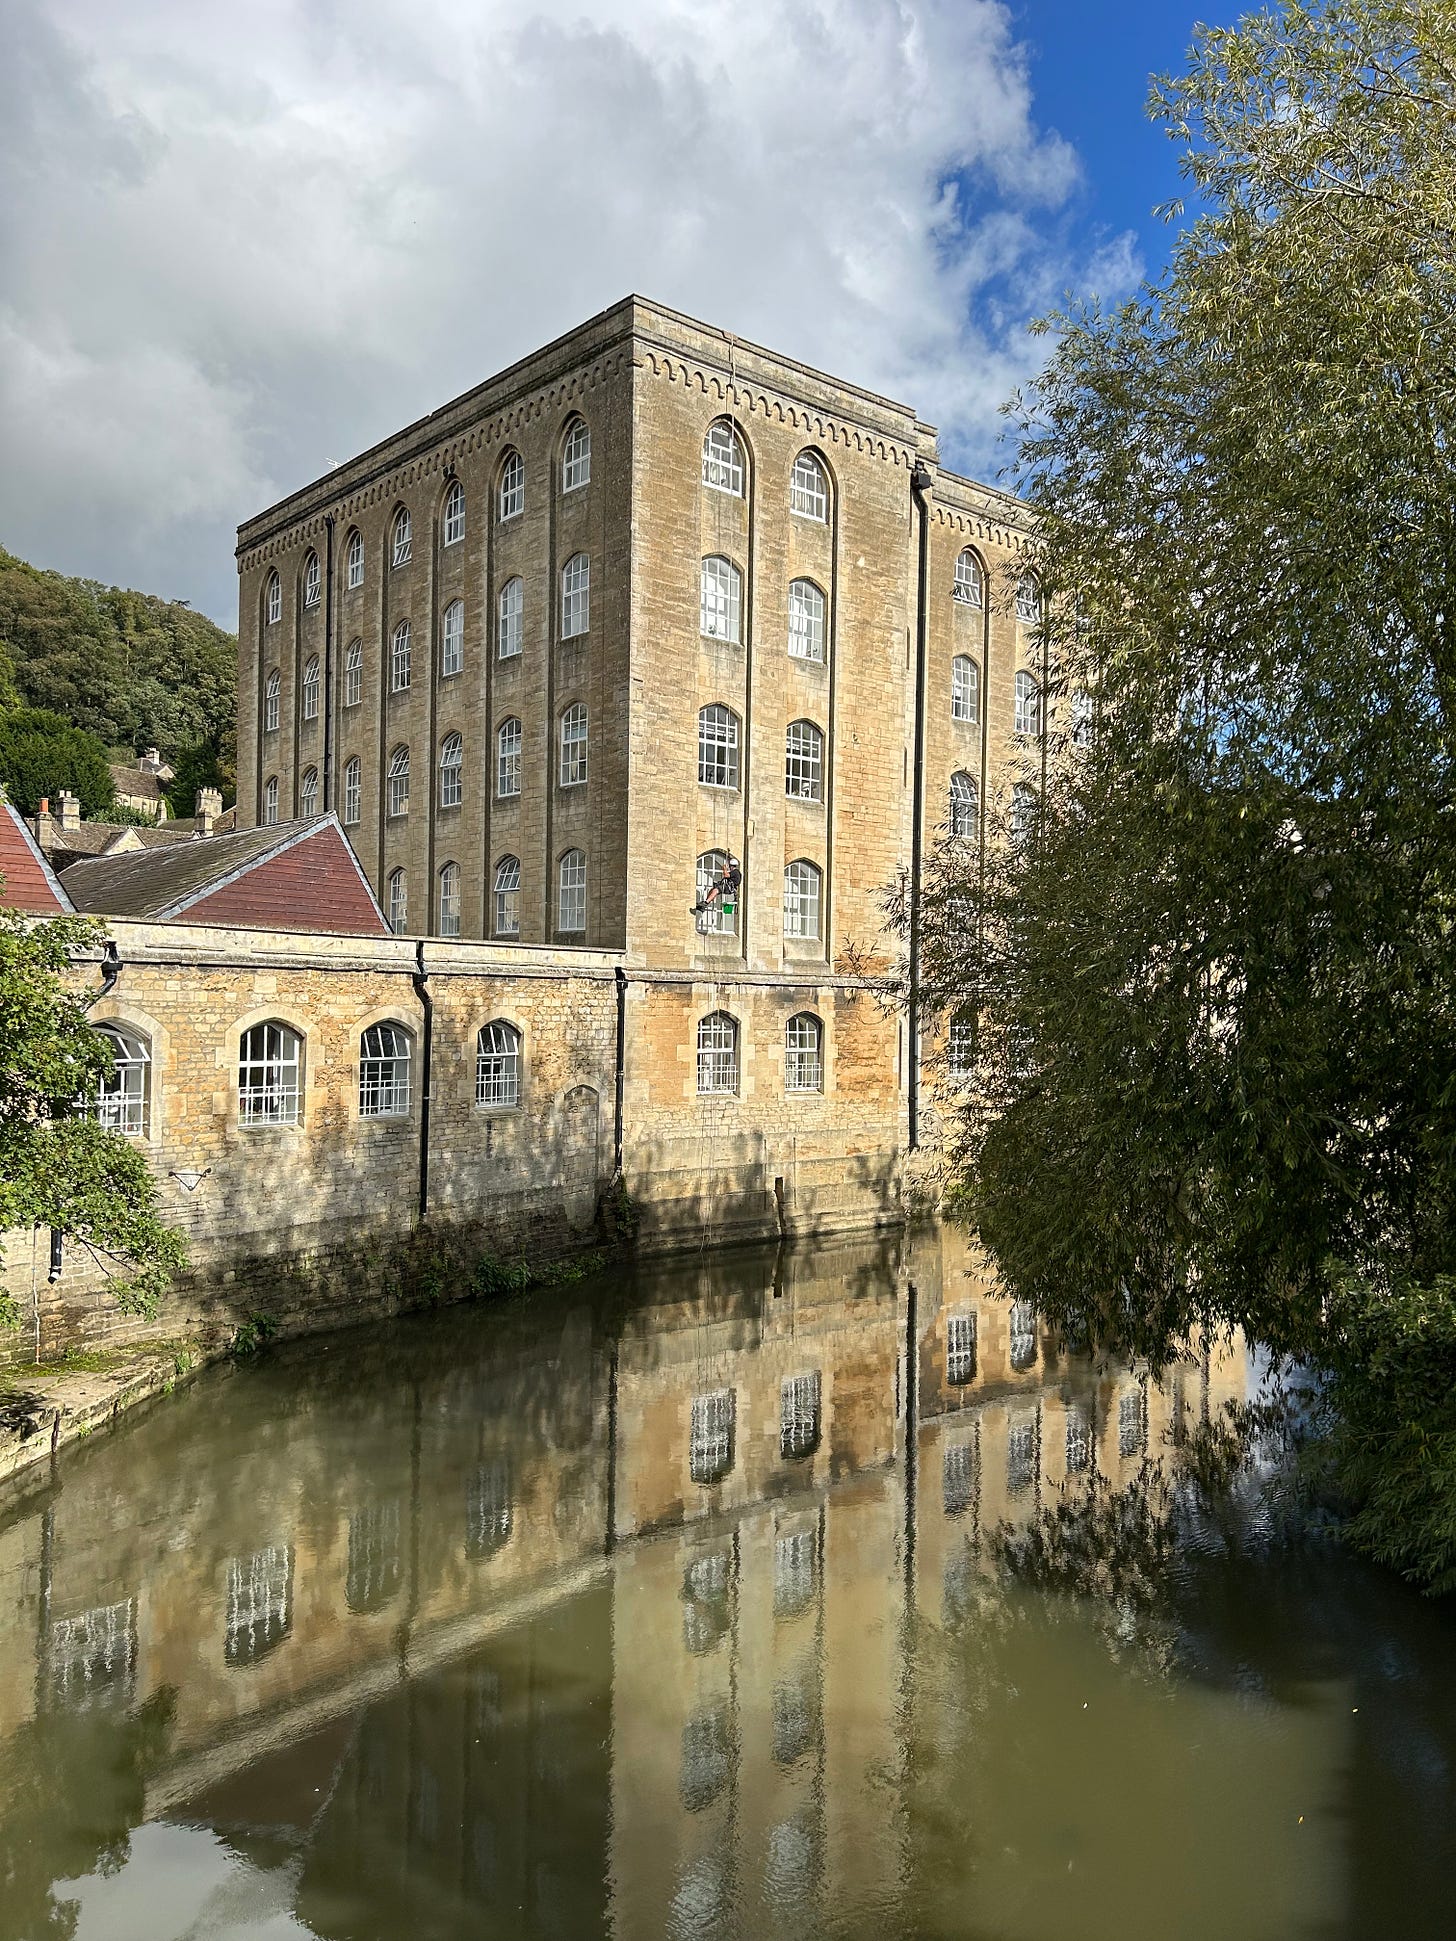 A window cleaner abseils down the side of Abbey Mill, Bradford on Avon, Wiltshire. Image: Roland's Travels